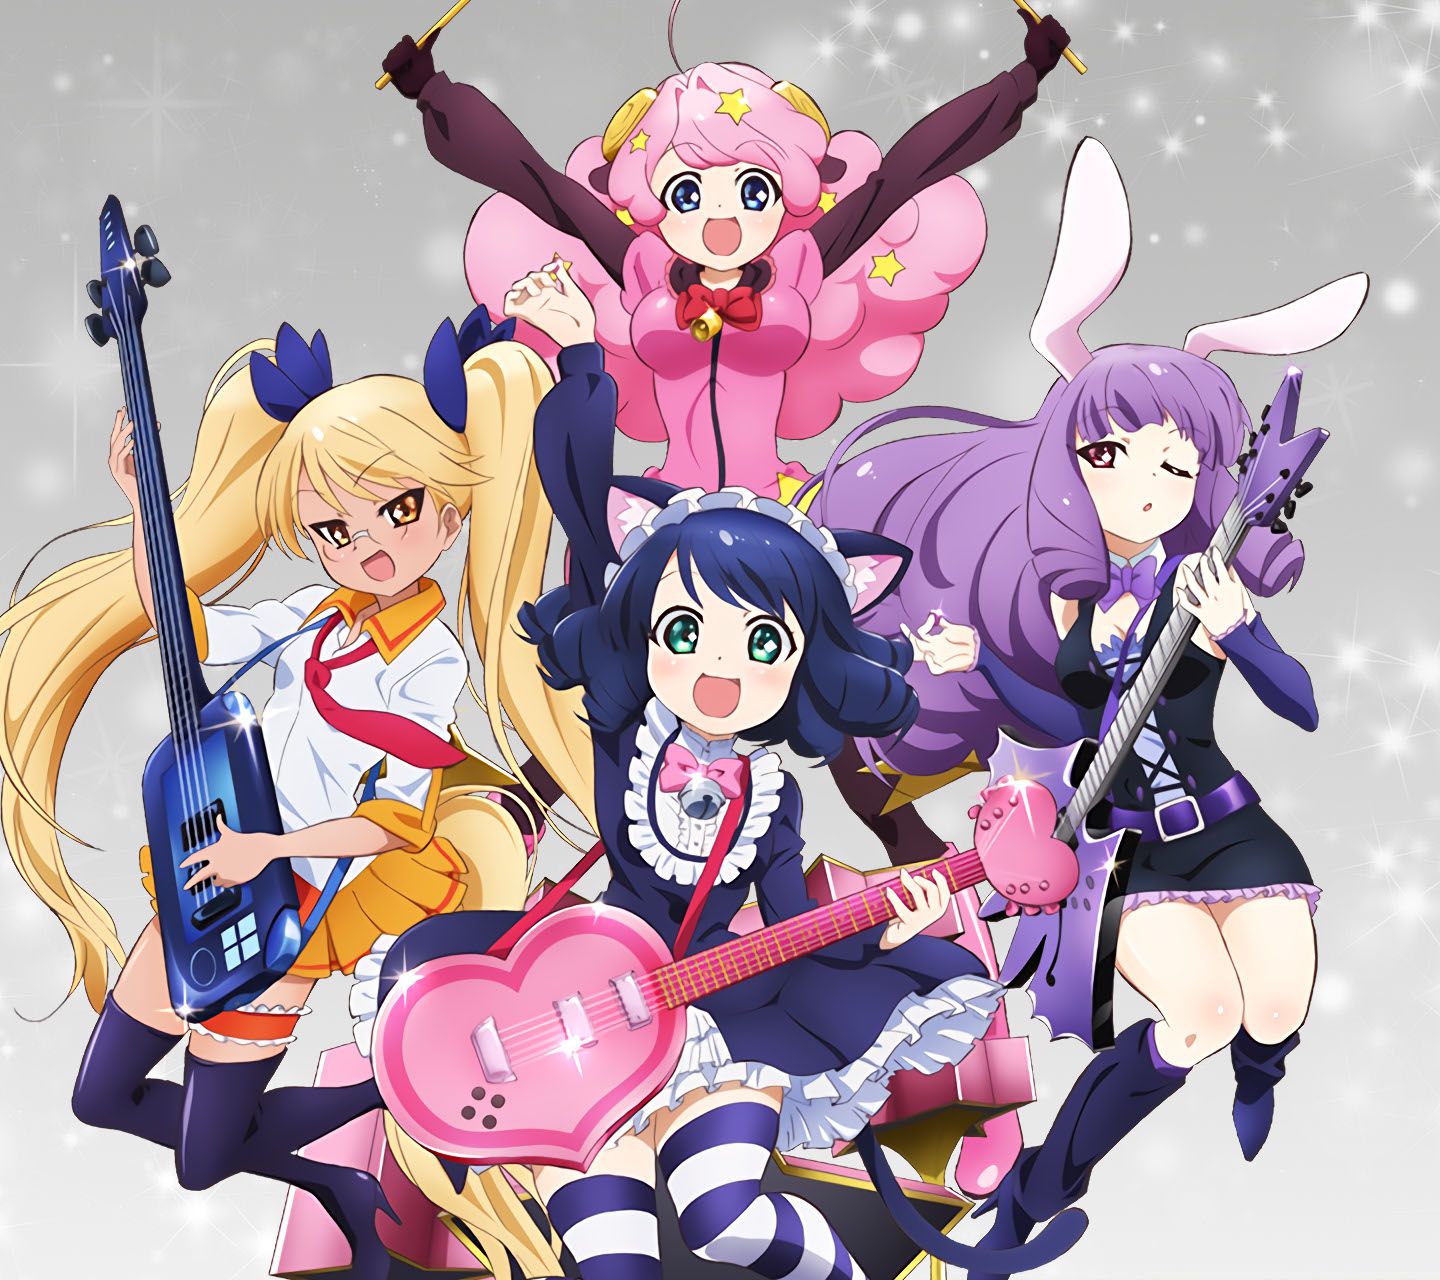 Show By Rock Androidスマホ壁紙 スクロール対応 1 アニメ壁紙ネット Pc Android Iphone壁紙 画像